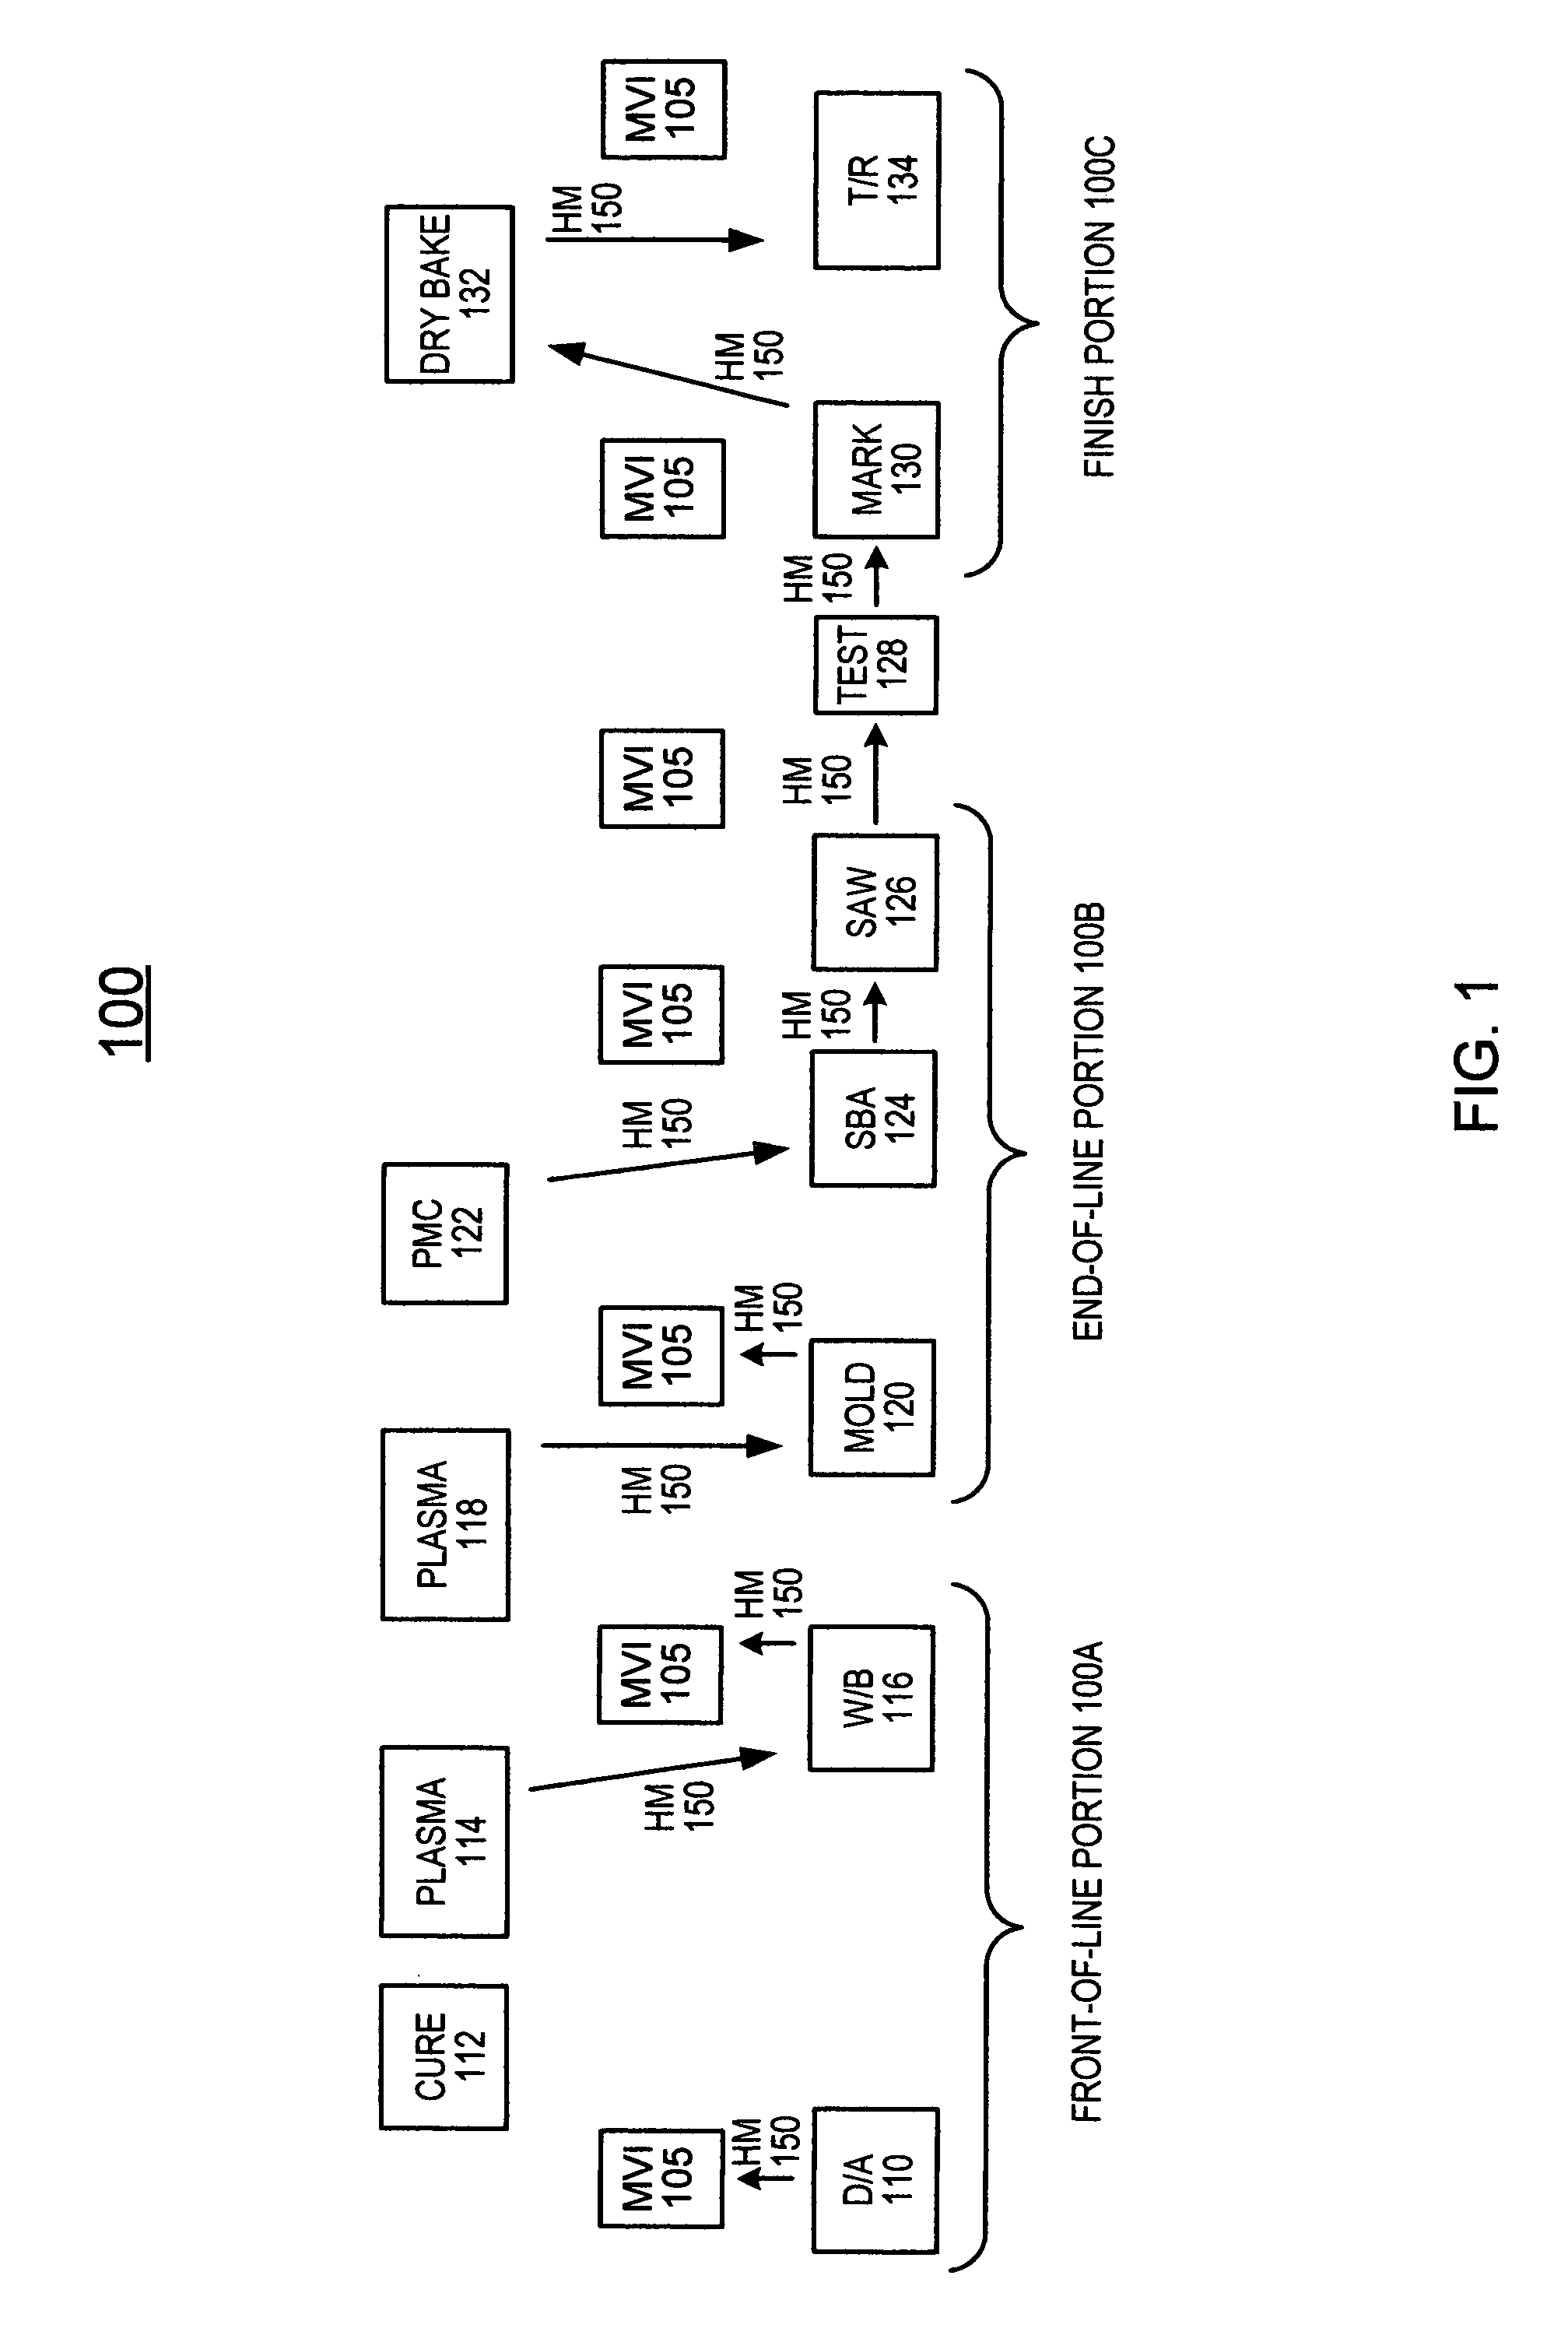 Method and system for a reject management protocol within a back-end integrated circuit manufacturing process